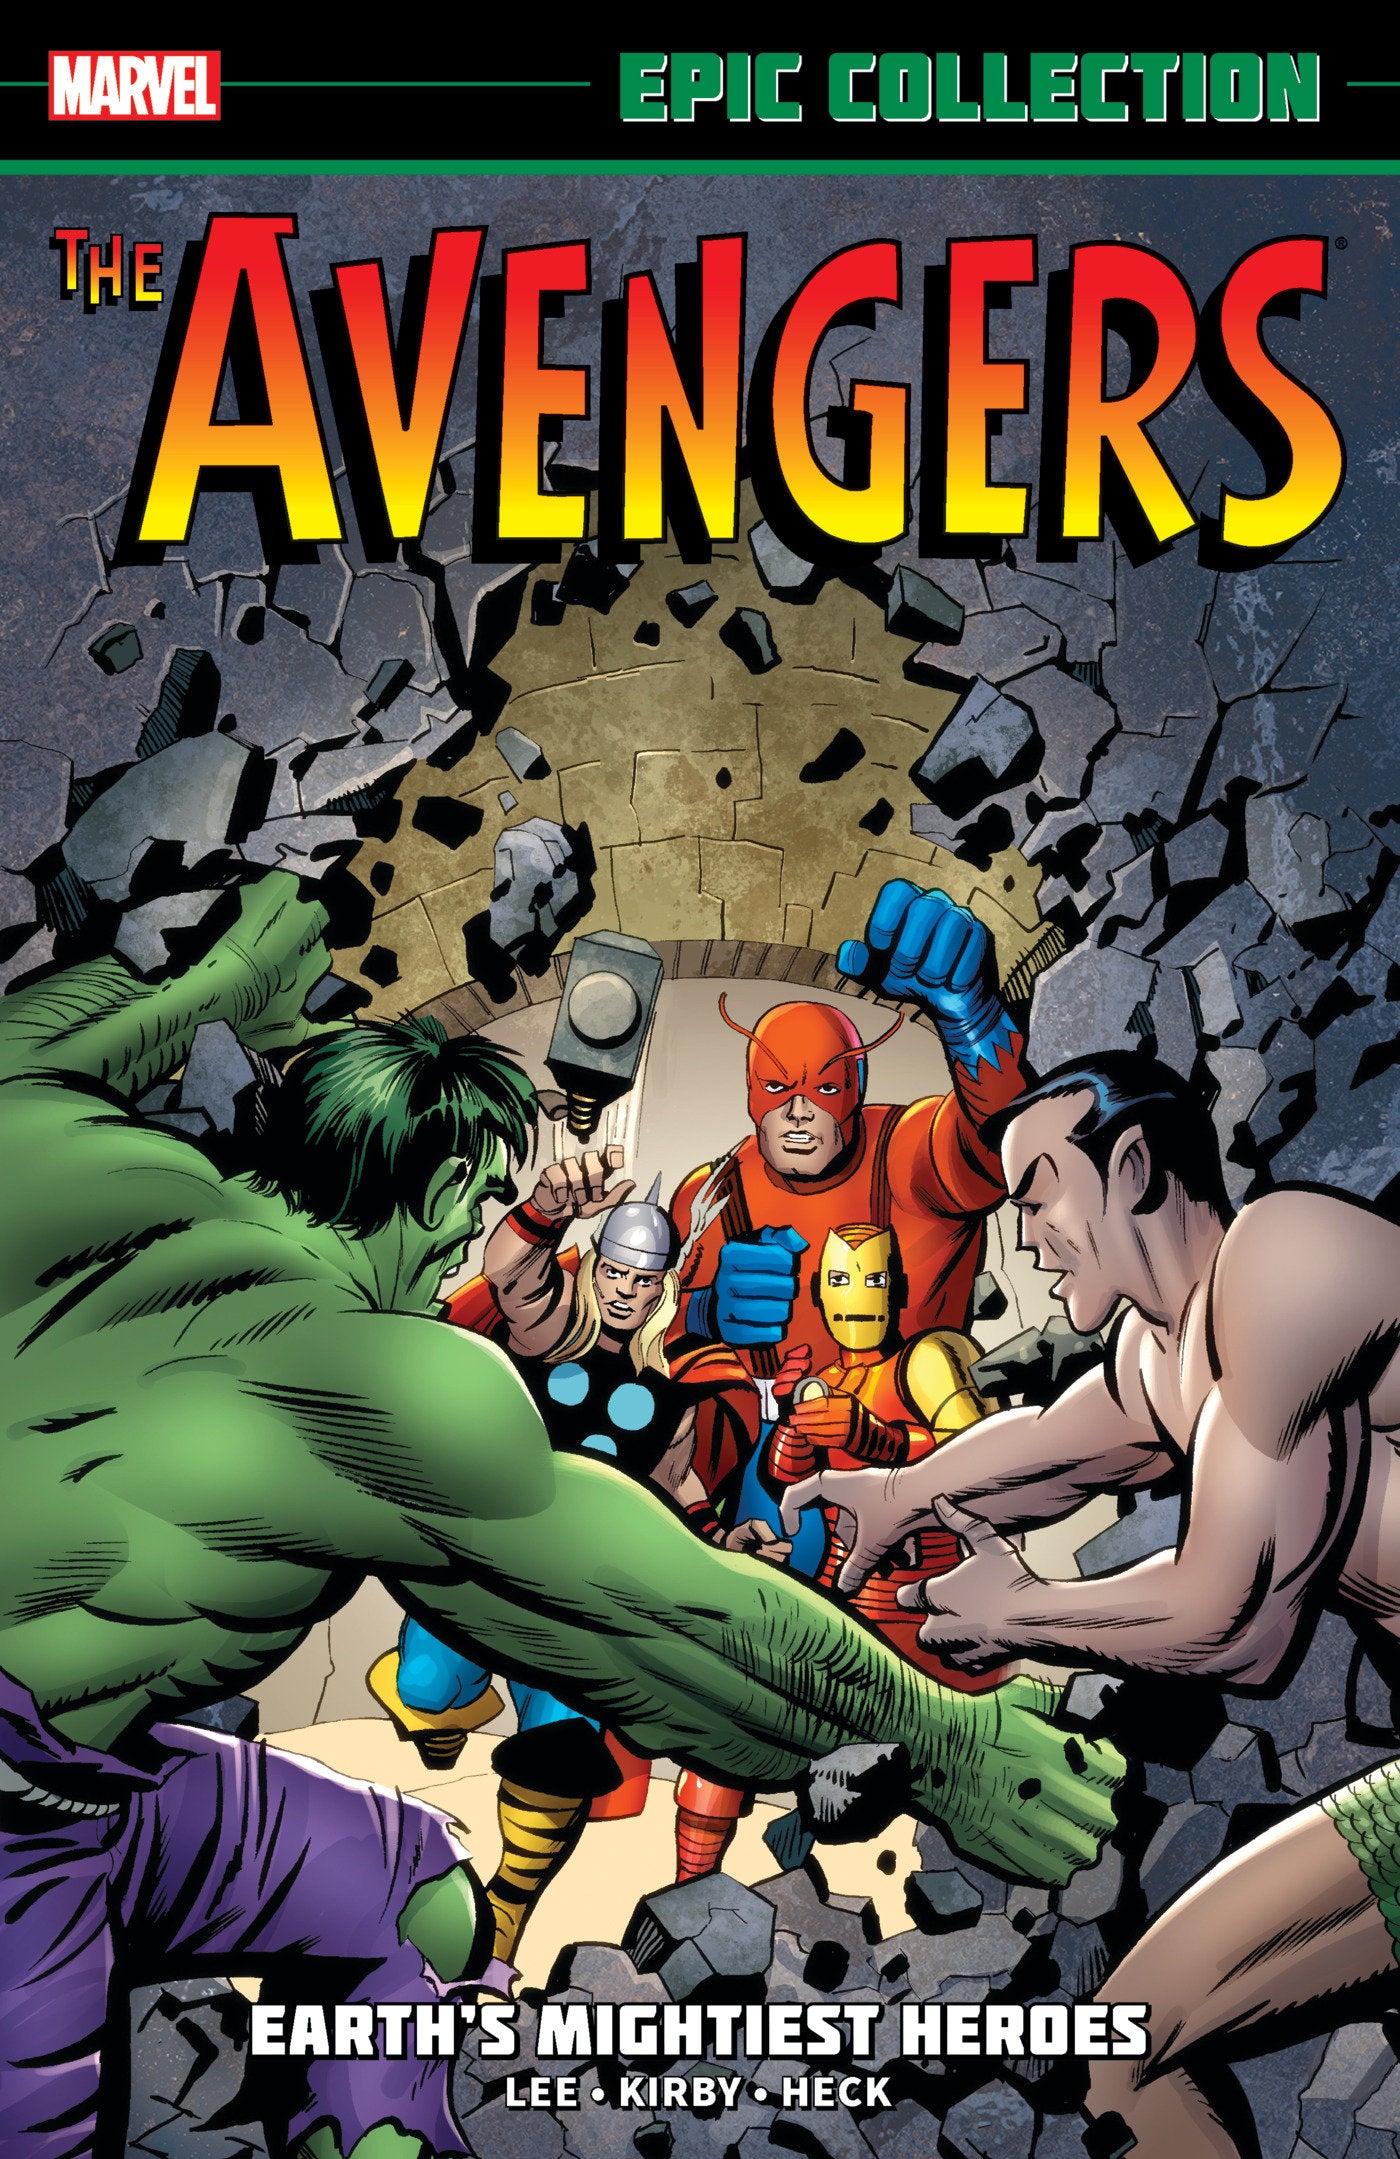 AVENGERS EPIC COLLECTION: EARTH'S MIGHTIEST HEROES TRADE PAPERBACK